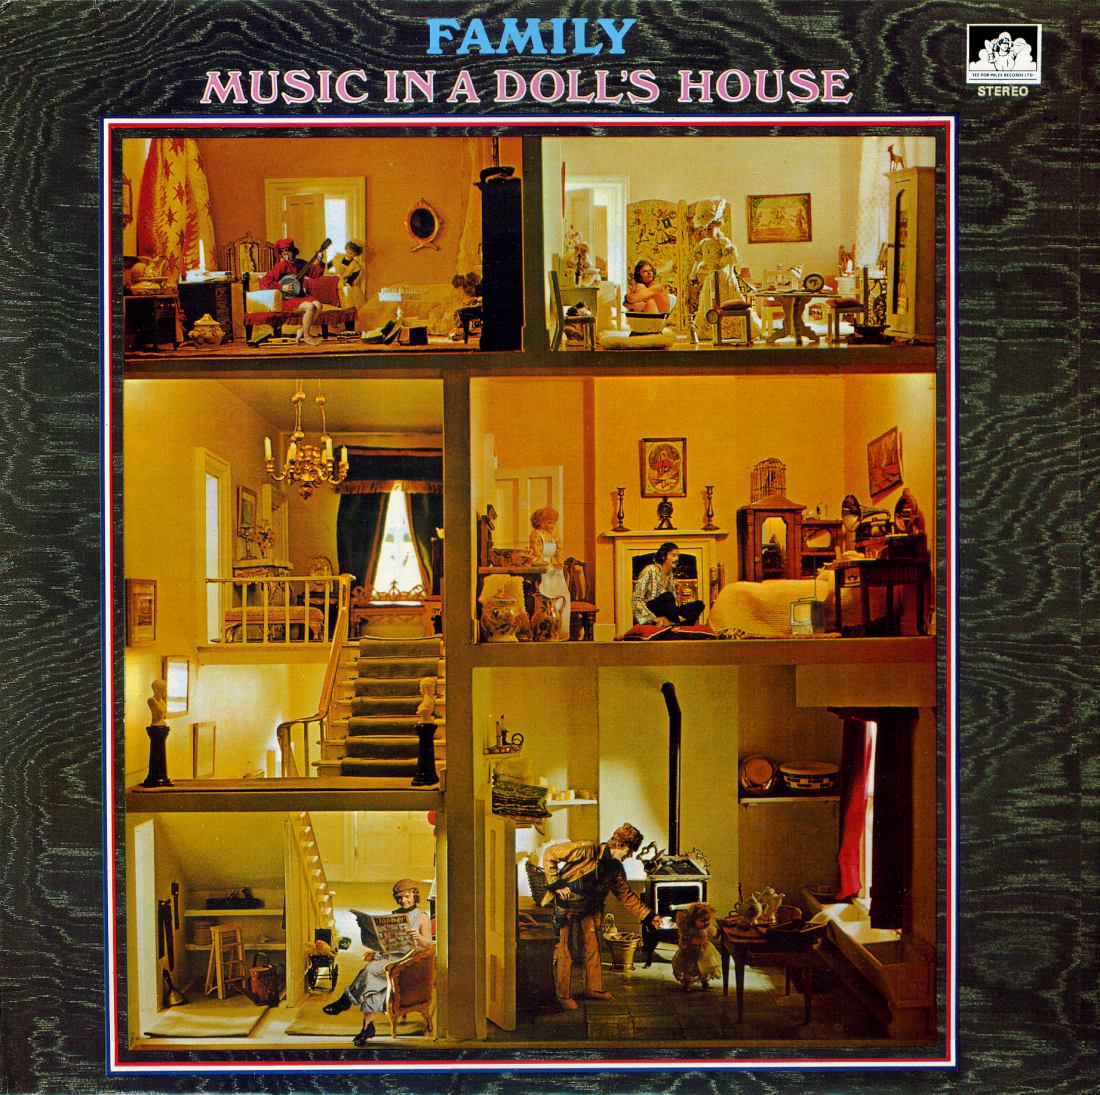 Family_Music in a doll's house_1